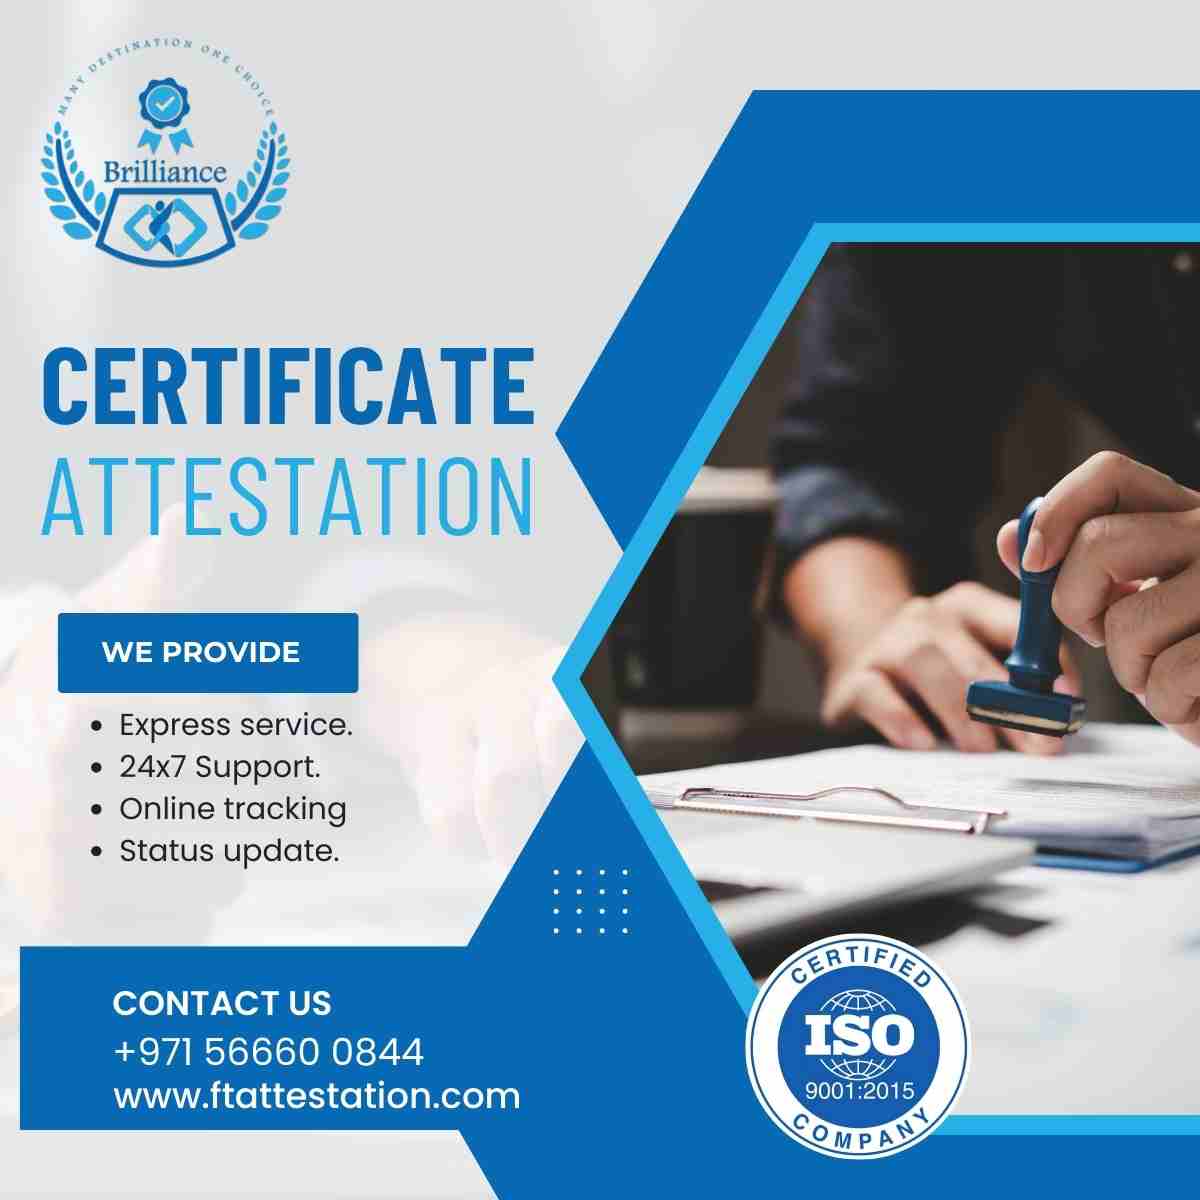 Professional Attestation Of Certificate Services In Uae